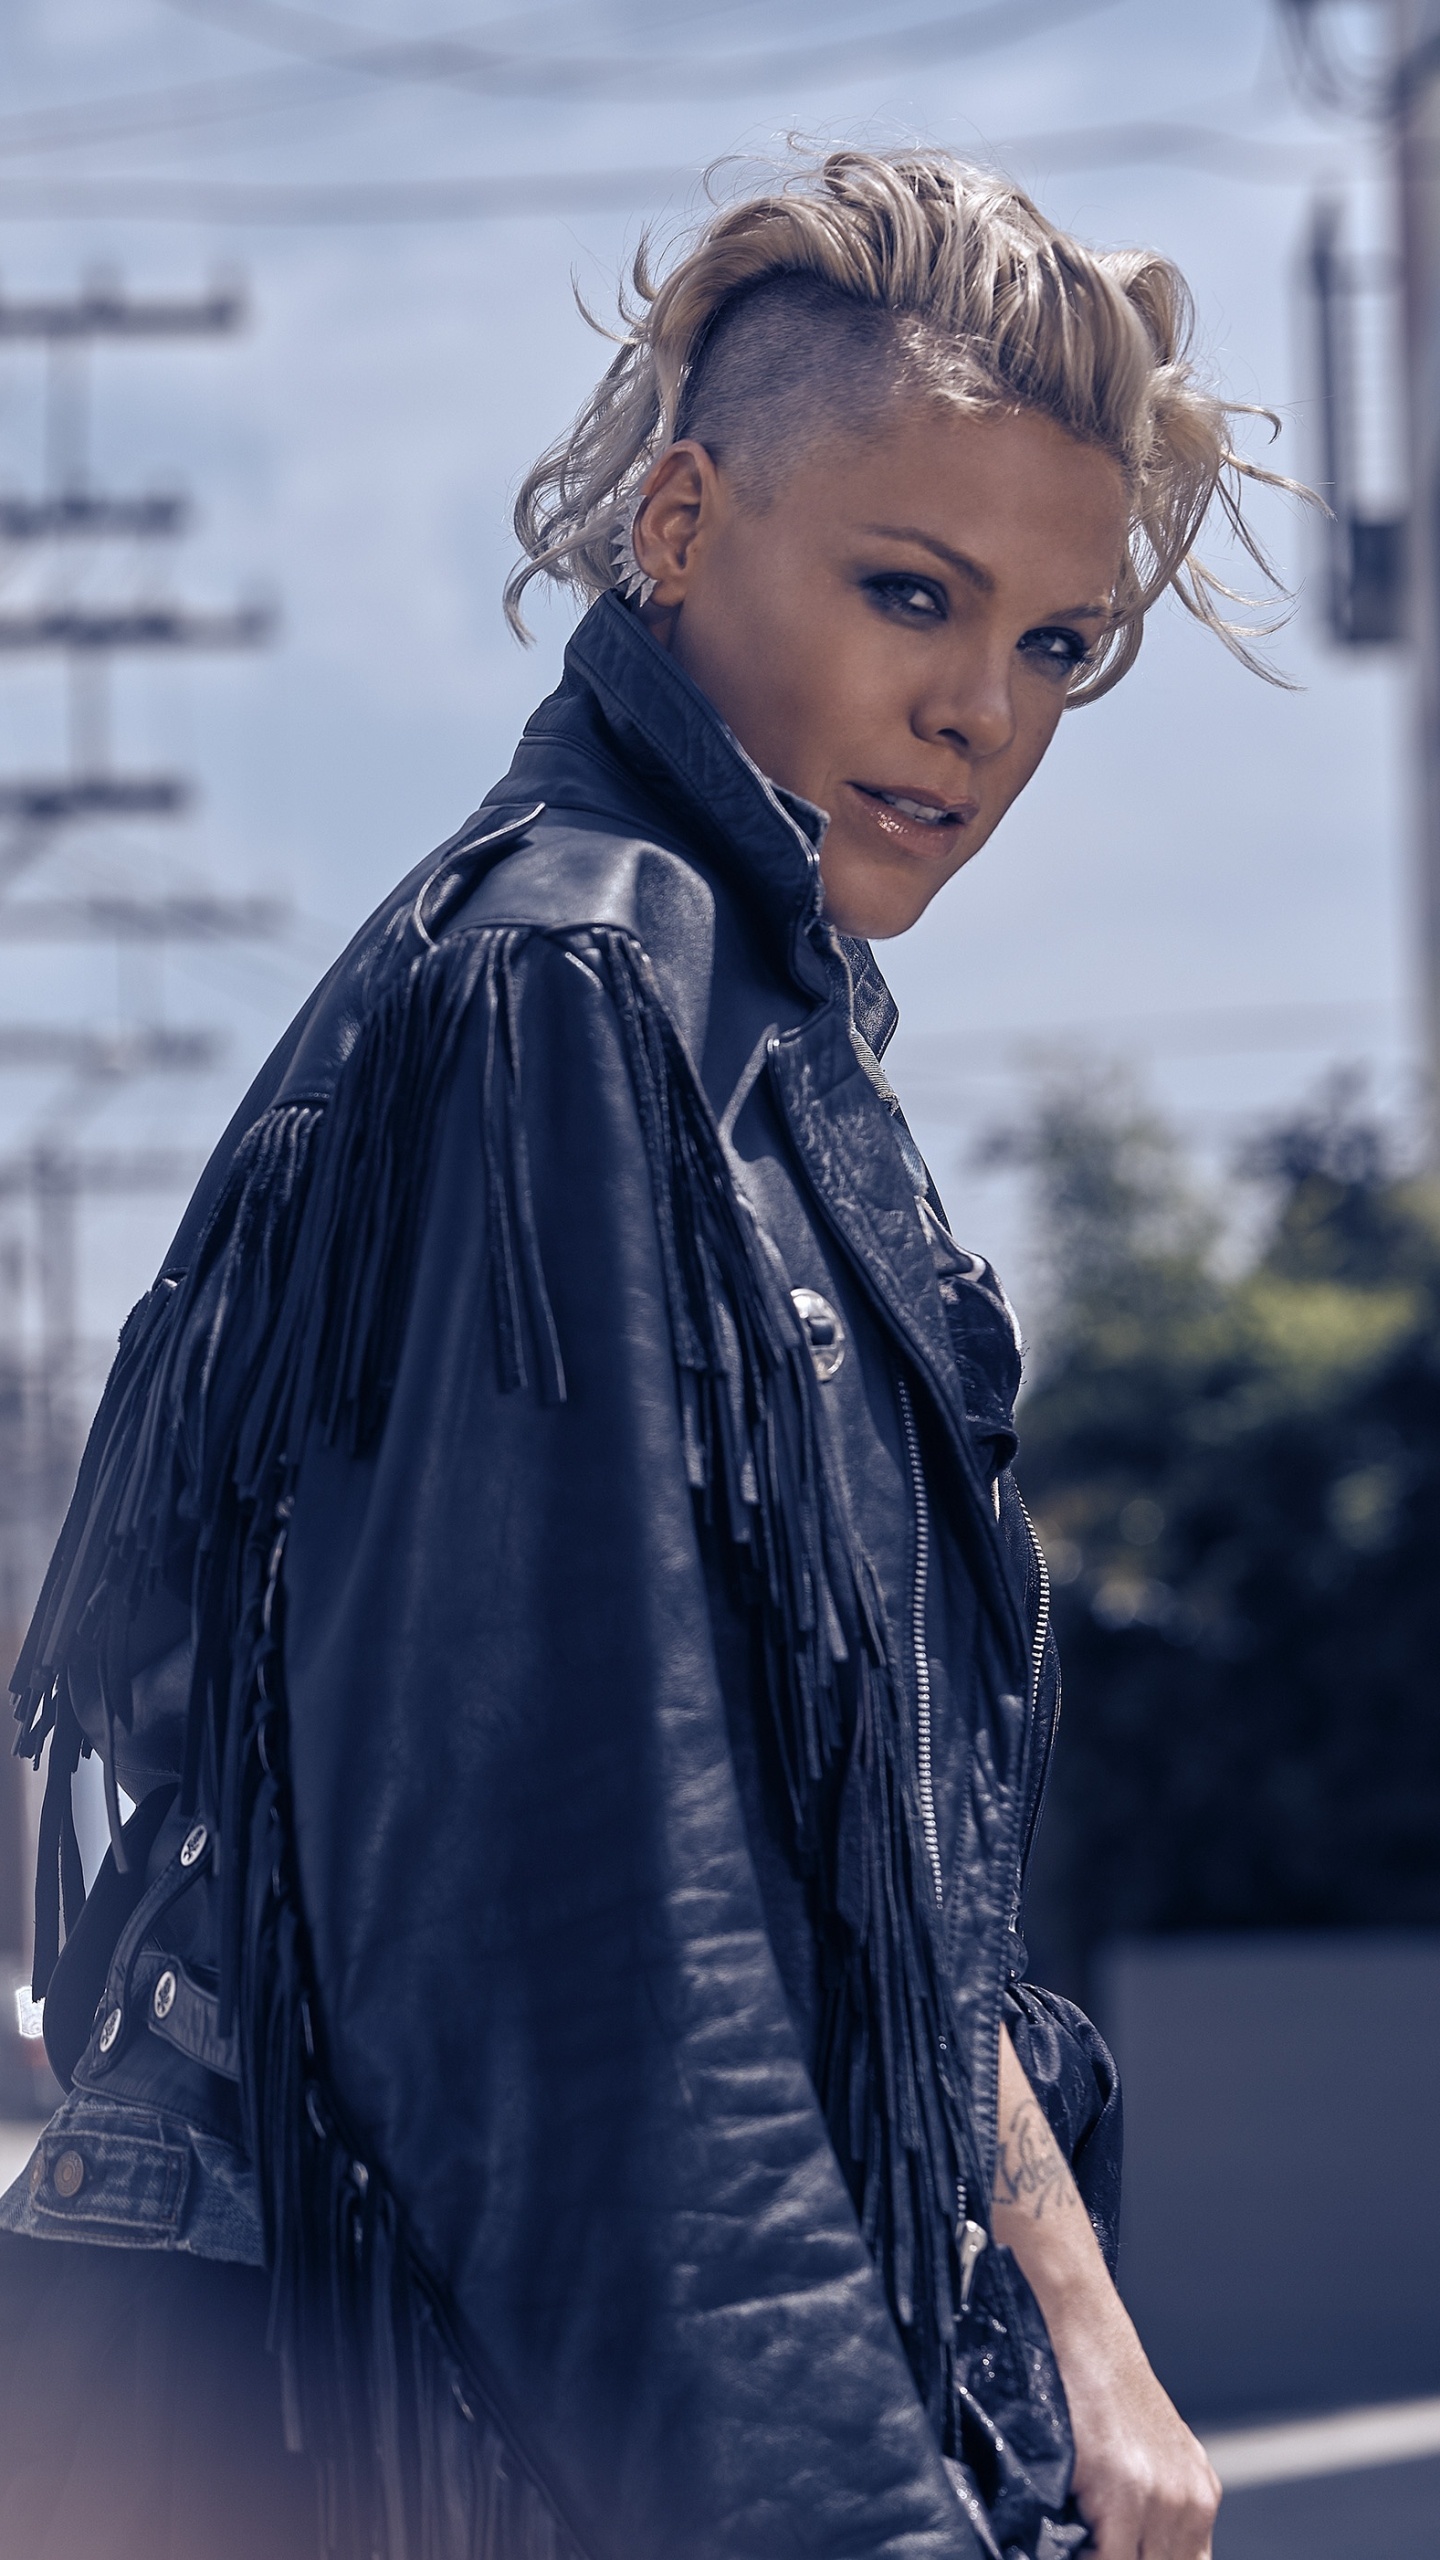 Pink The Singer Wallpaper posted by Sarah Mercado 1440x2560